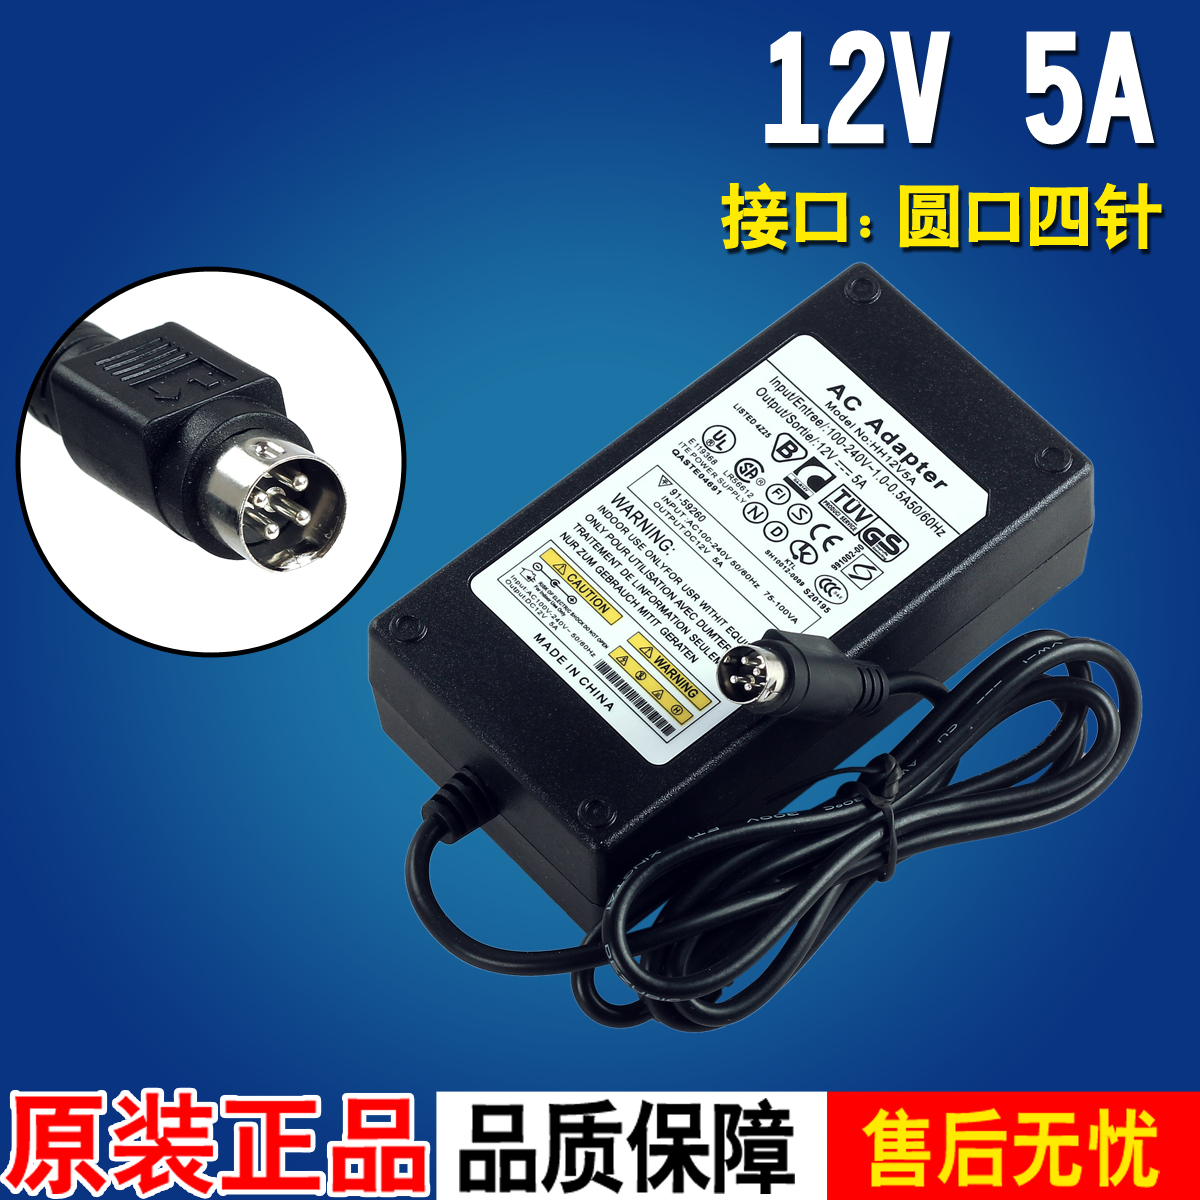   HIKVISION ϵ ũ  ڴ 12V5A FOUR -NEEDLE 4 -NEEDLE   